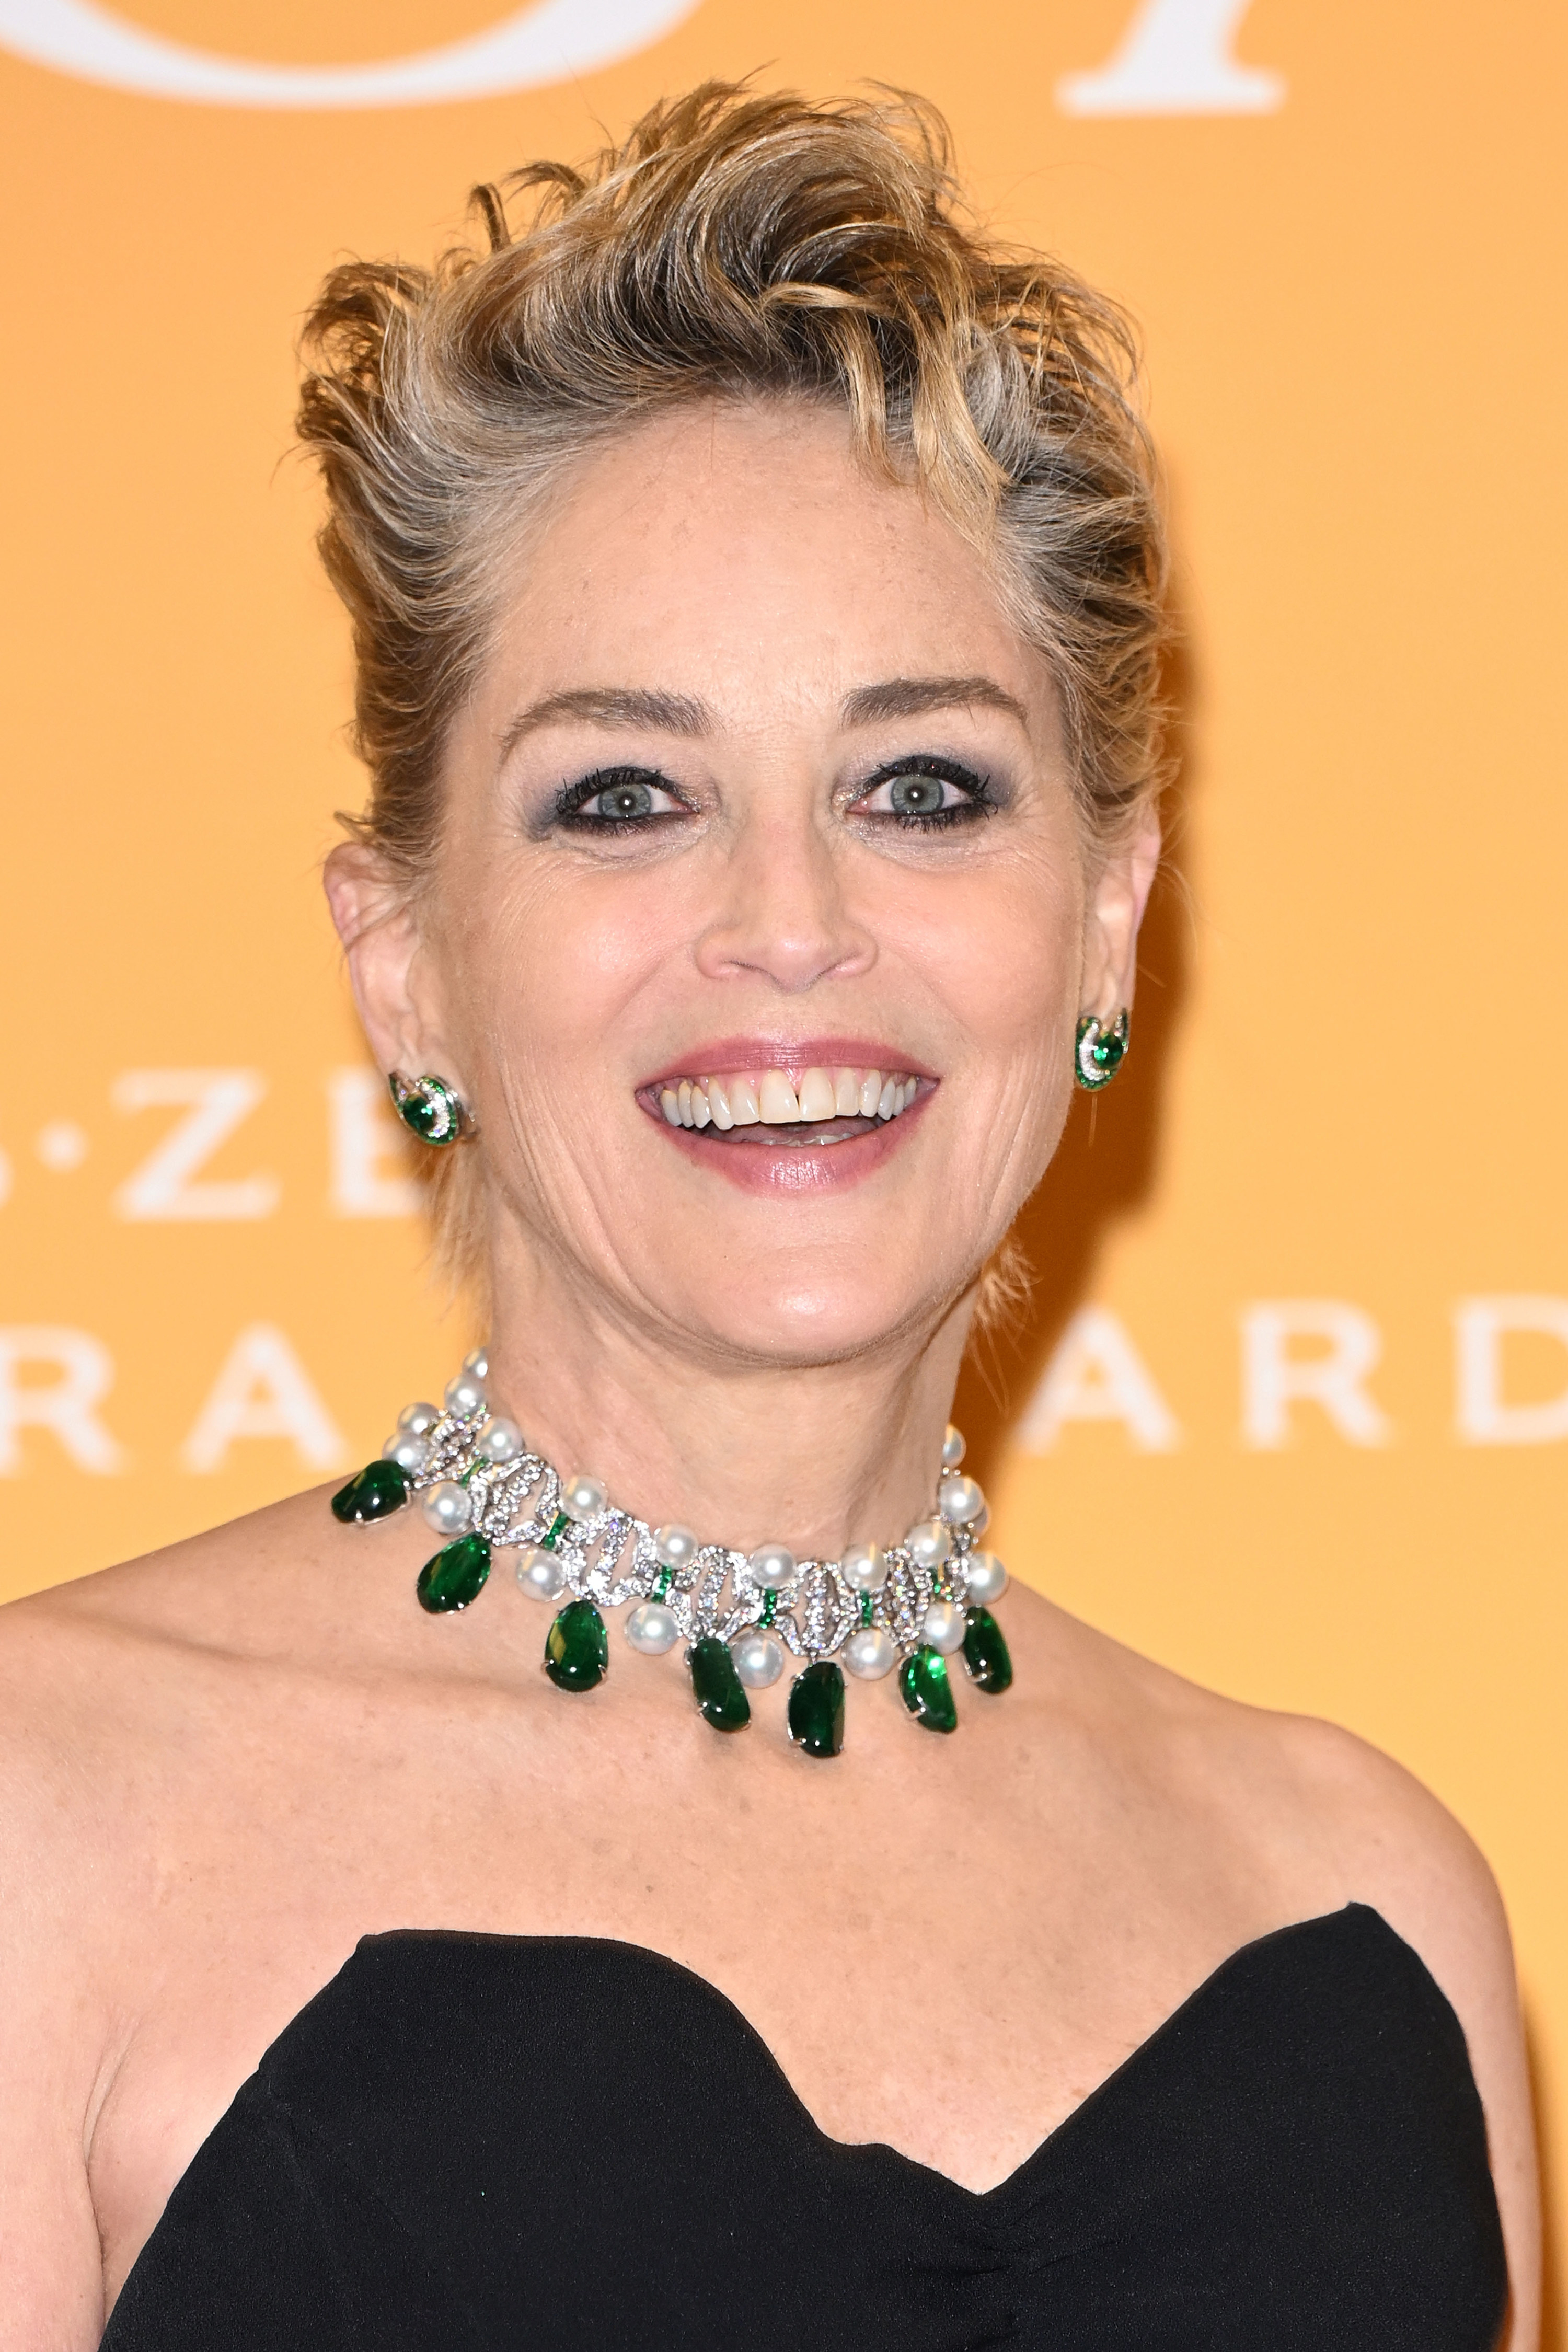 Sharon Stone smiles at an event